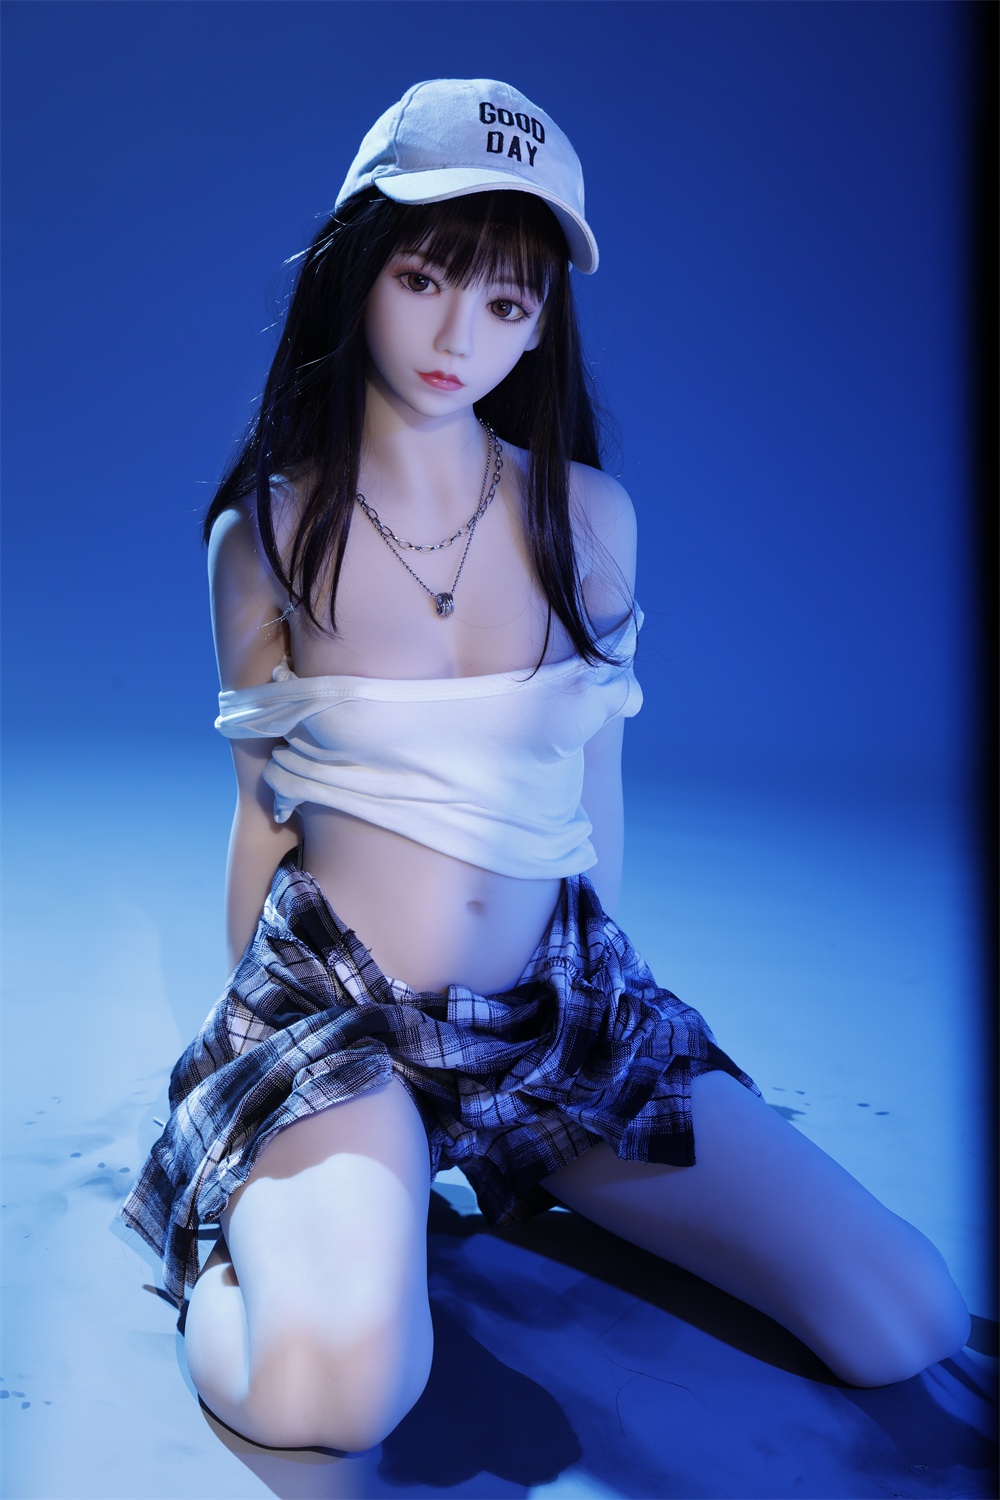 Sakurako-4ft5/135cmAsian Style Sex Doll with realistic features-Honeylovedoll